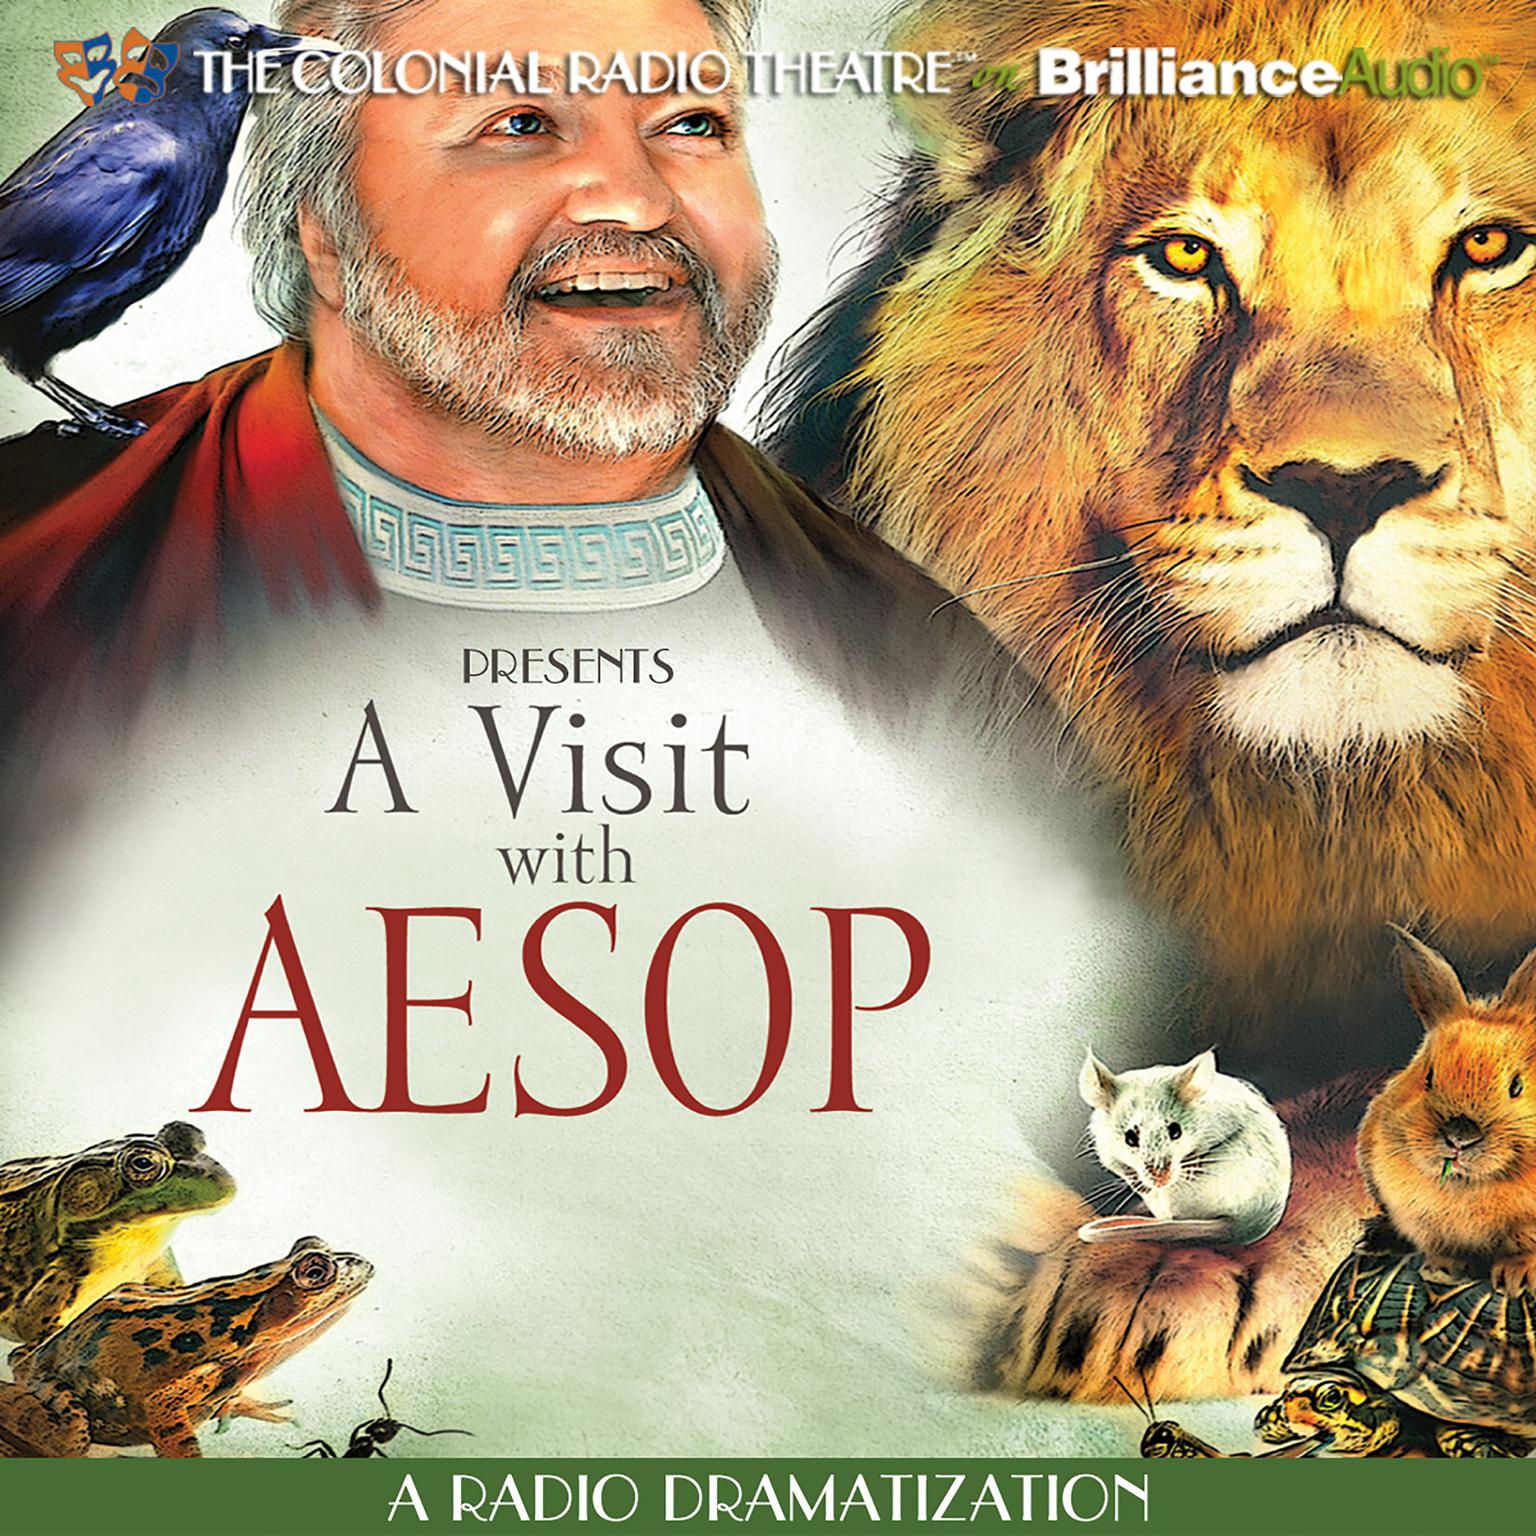 A Visit with Aesop: A One Man Show Audiobook, by J. T. Turner